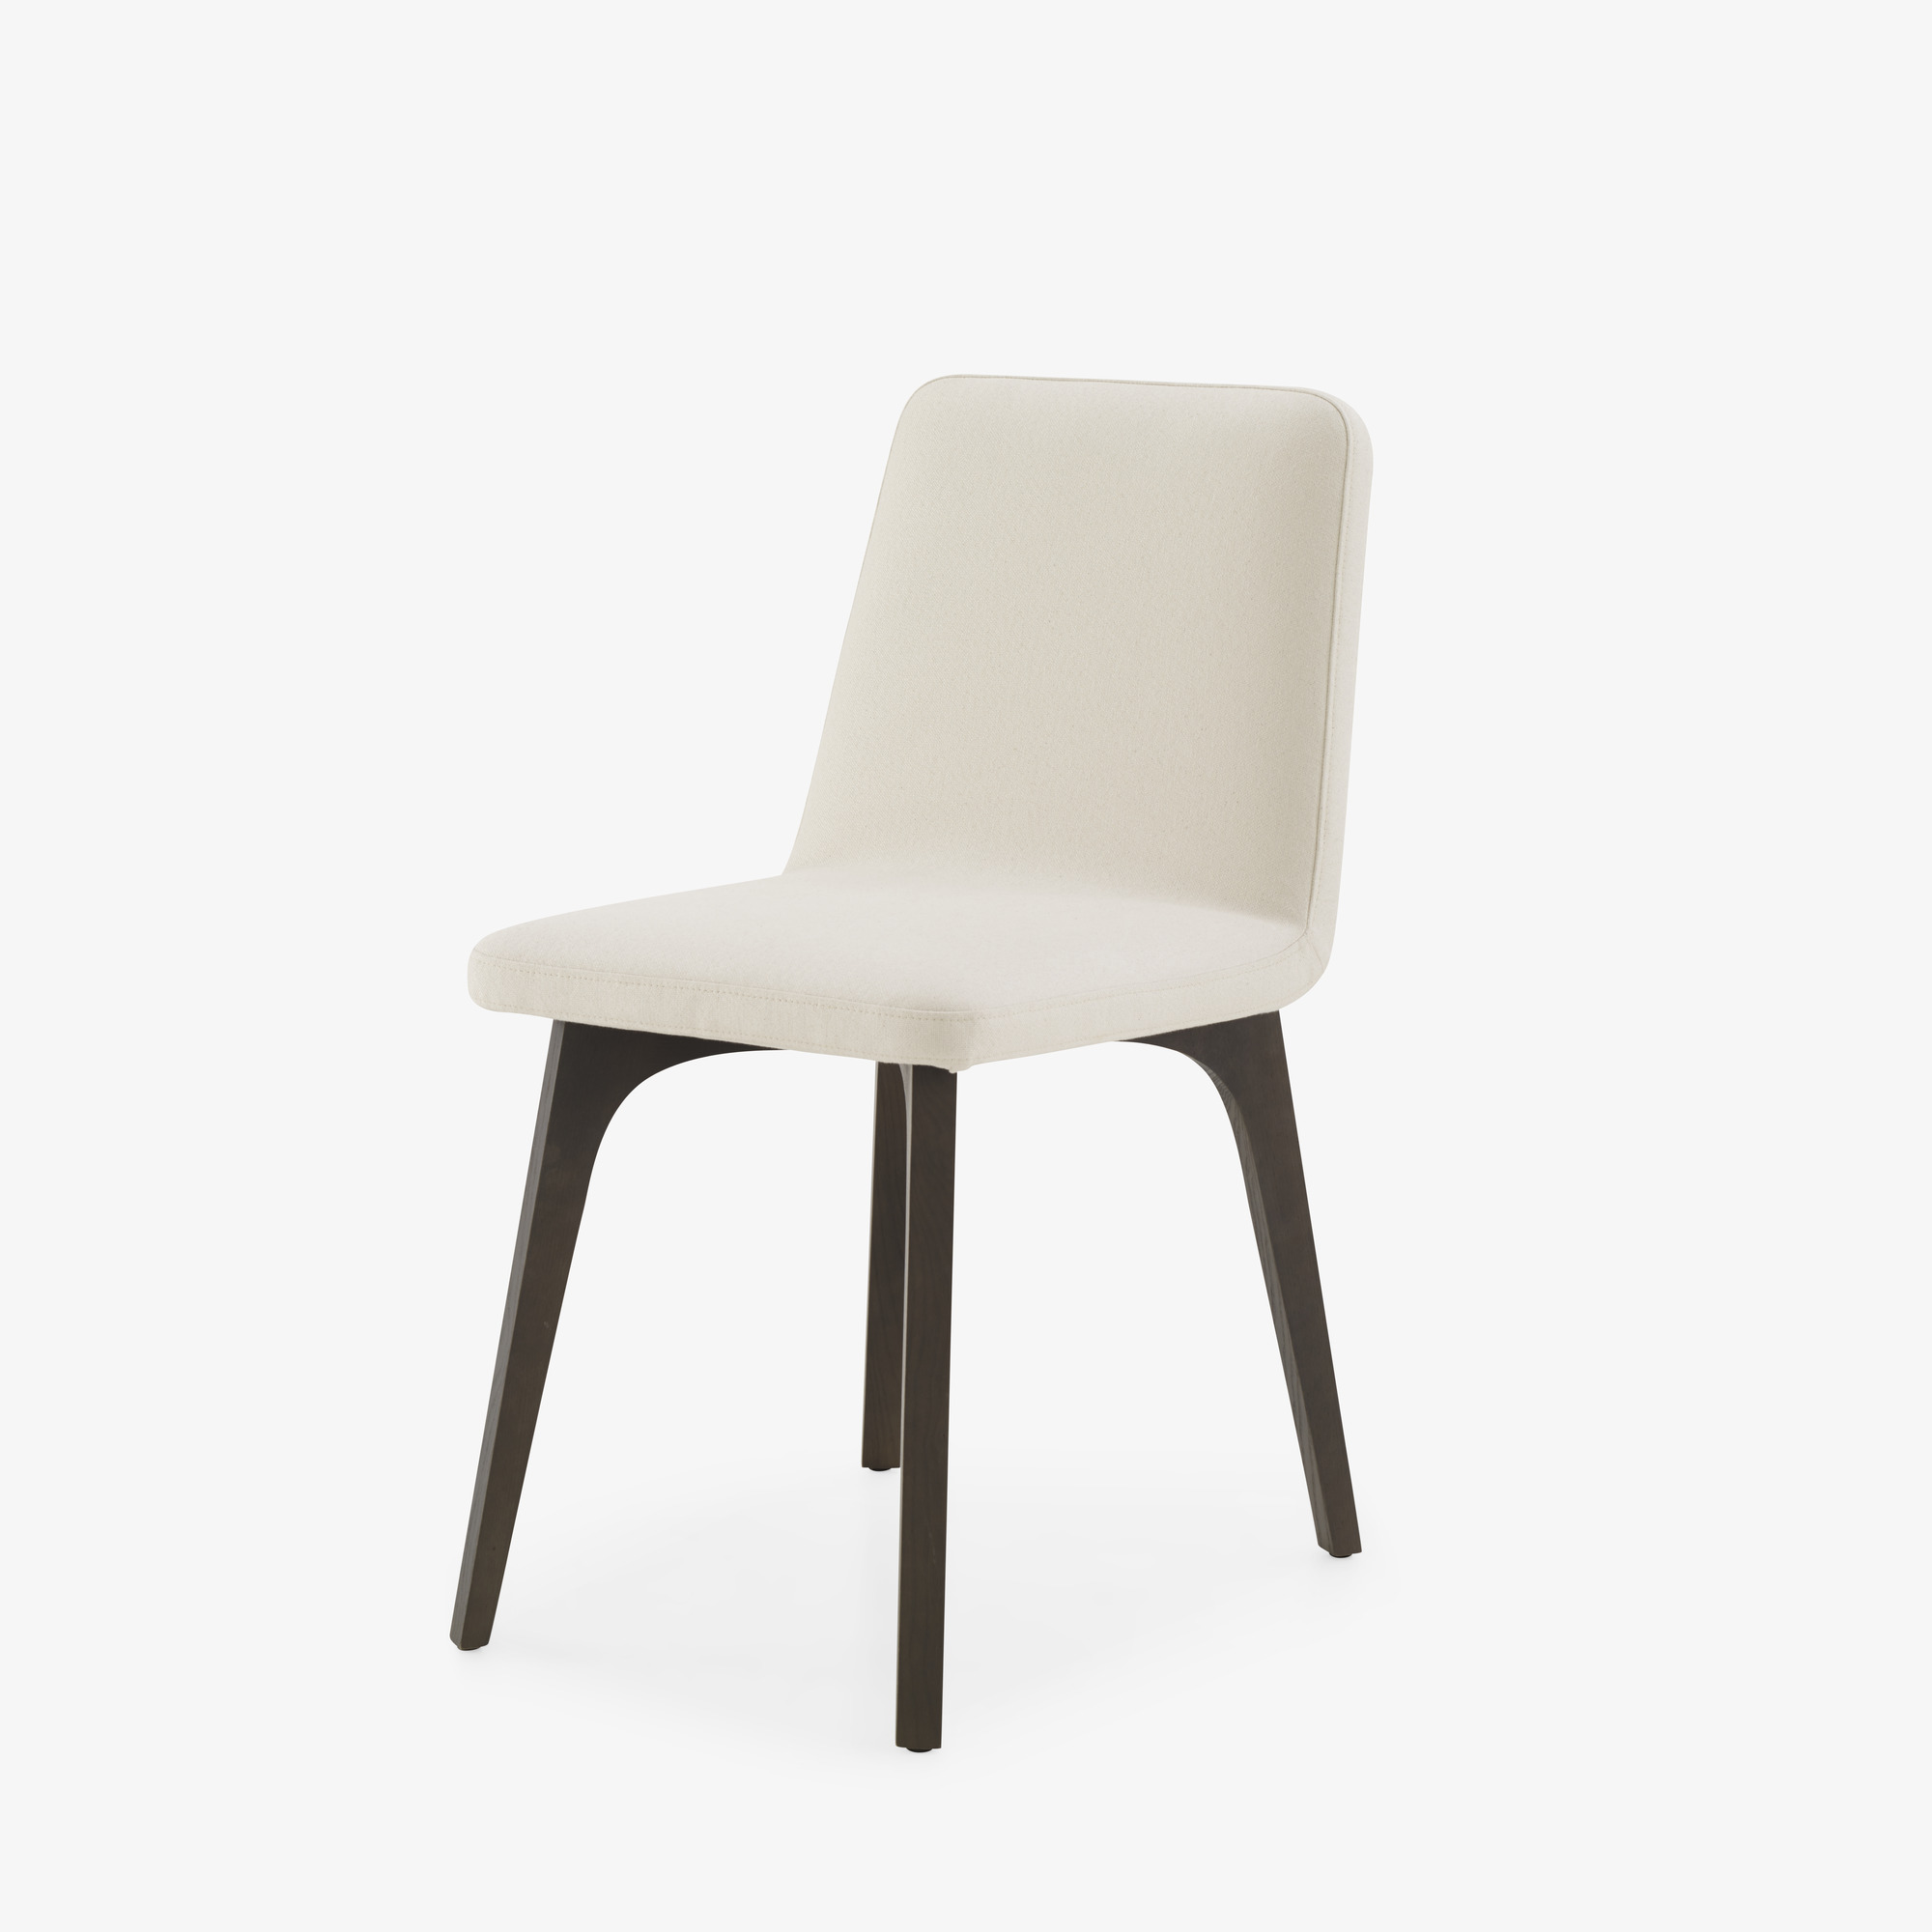 Image Dining chair wooden base 9